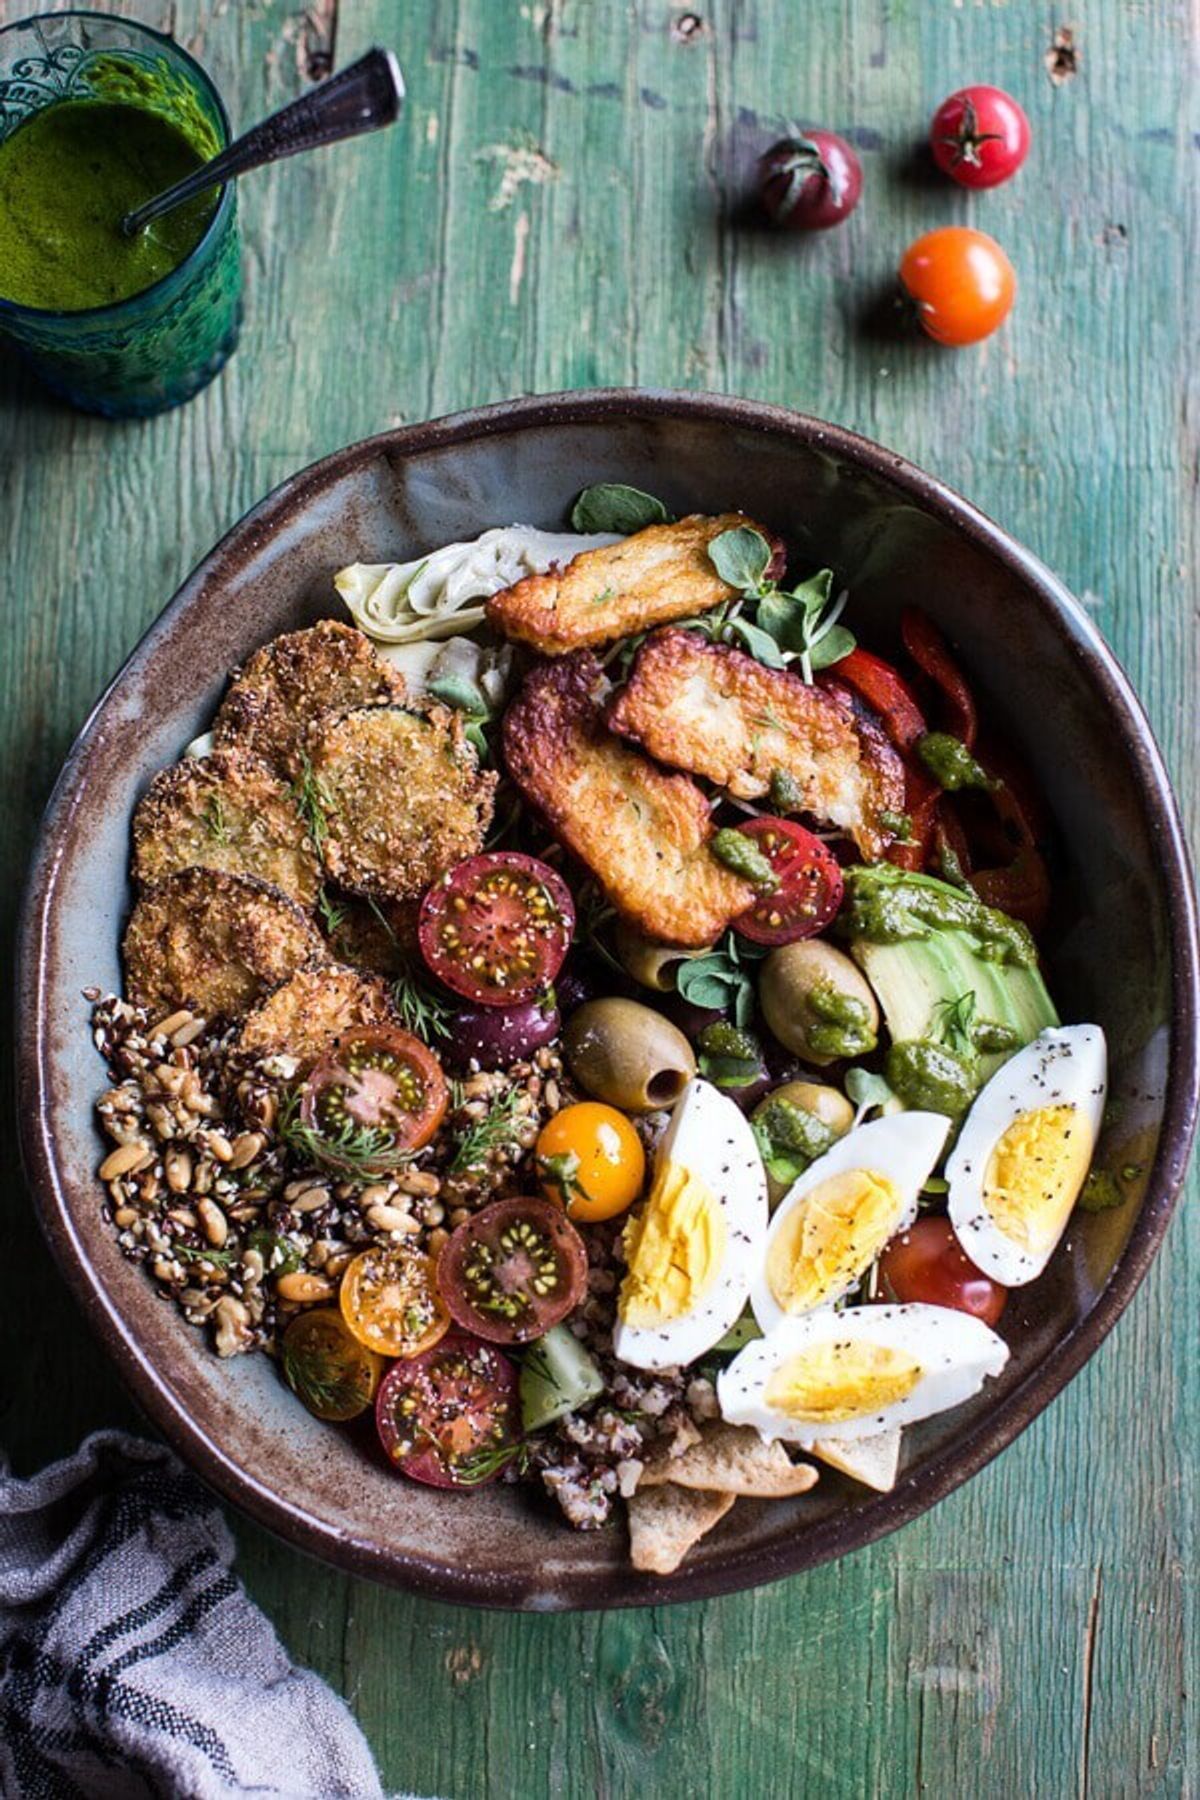 Greek Goddess Grain Bowl with “Fried” Zucchini, Toasted Seeds and Fried Halloumi